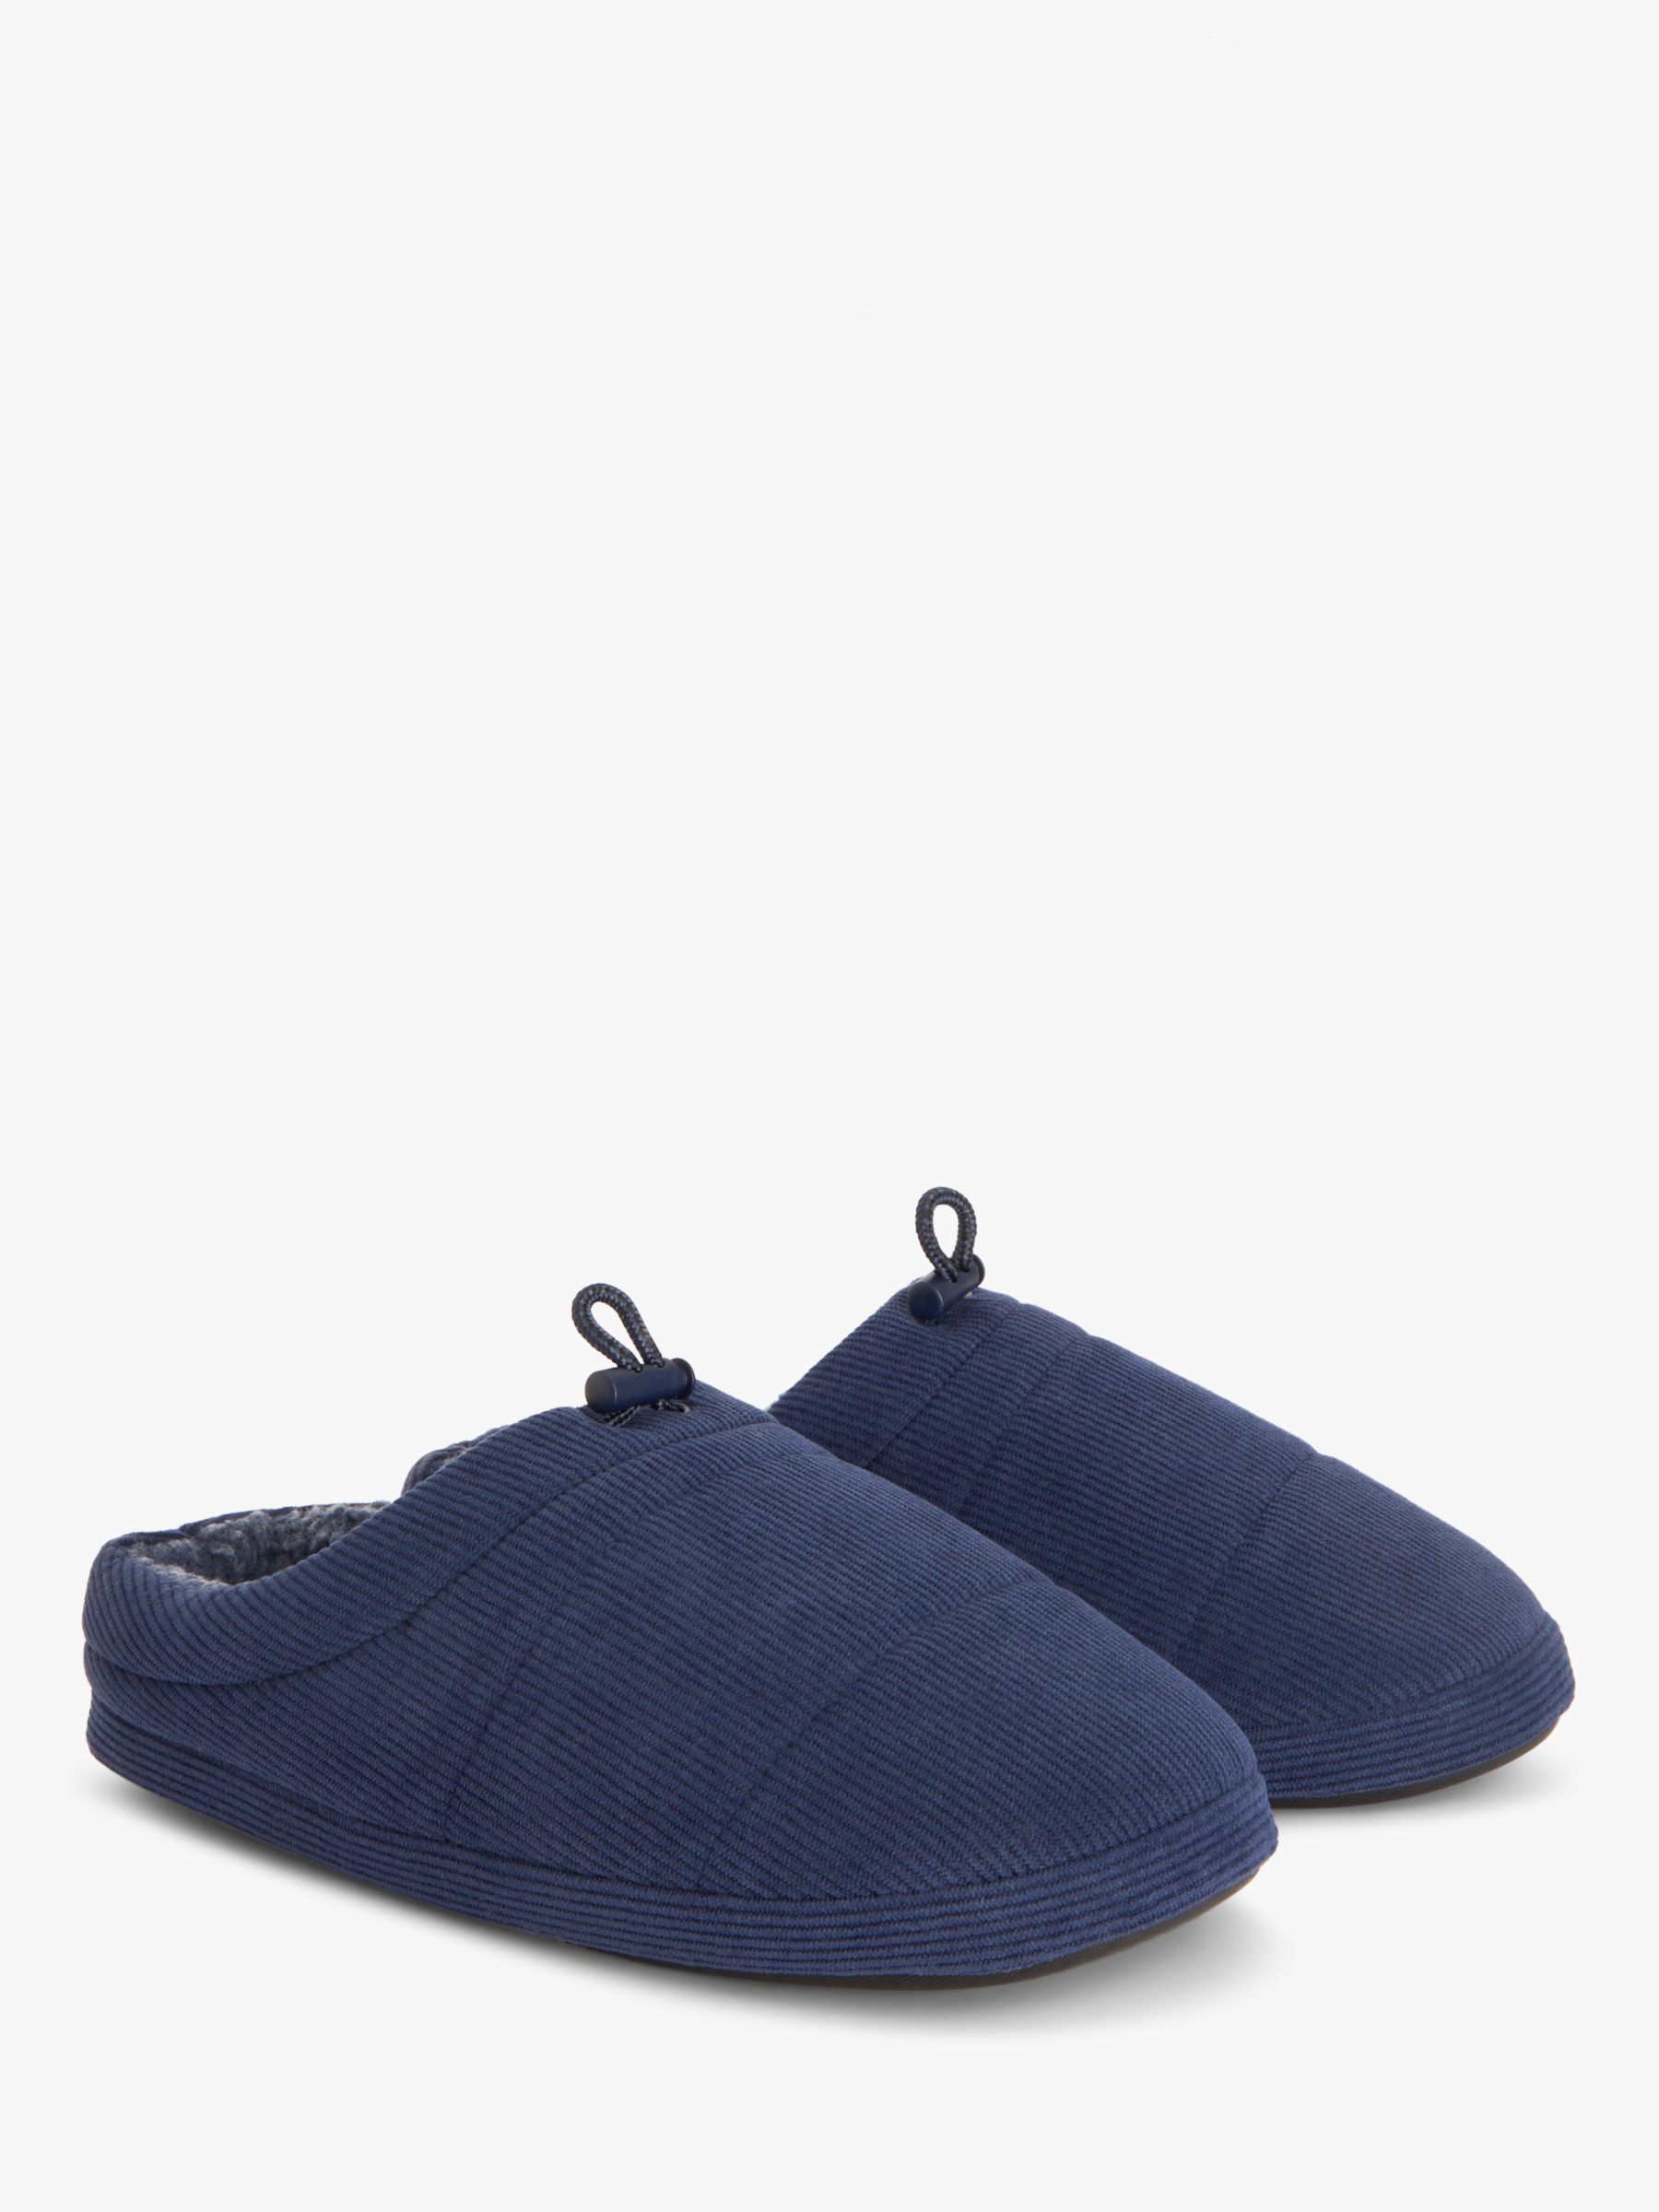 John Lewis ANYDAY Cord Mule Slippers, Navy at John Lewis & Partners